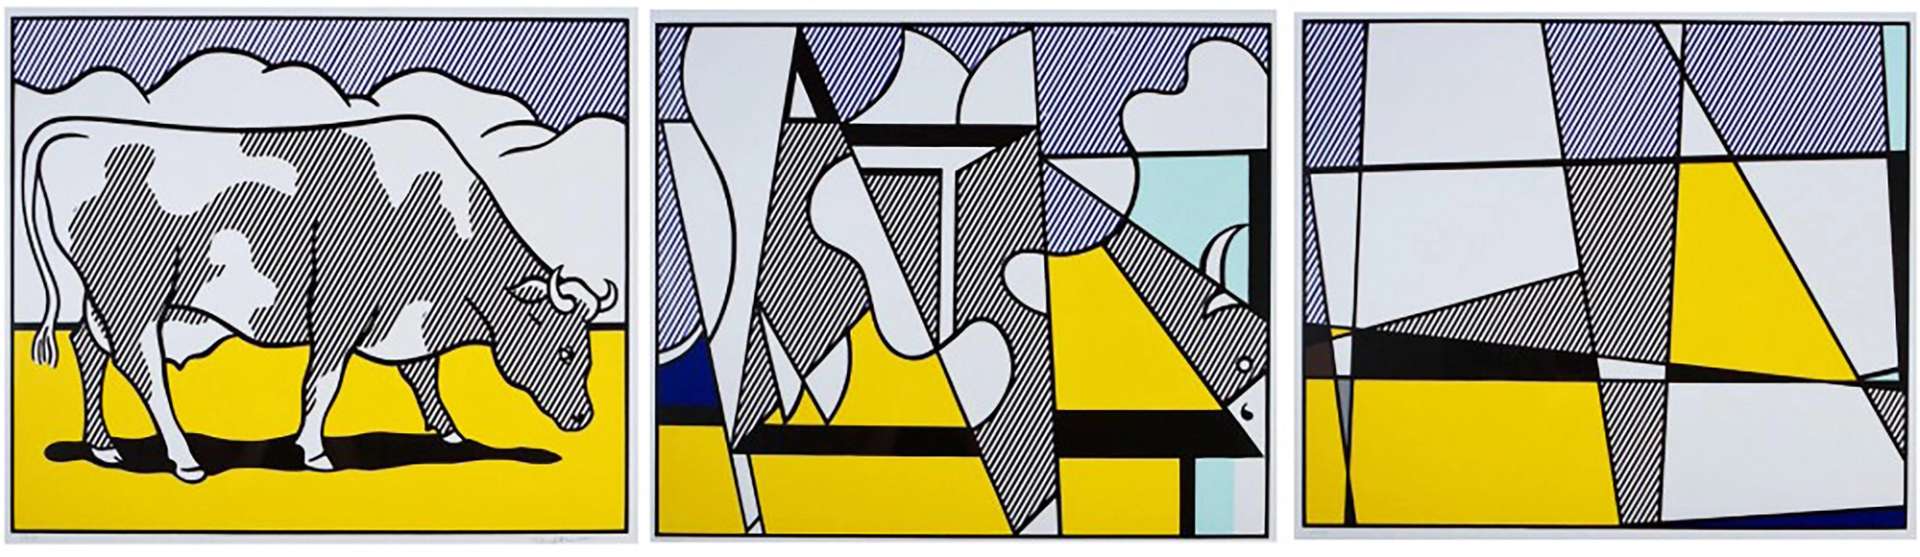 As such, Cow Going Abstract is a three-part portrait of a bull that maps a progressive shift from figuration to abstraction. Aspiring to playfully obscure the animal's naturalistic shape, Lichtenstein renders the subject indecipherable in a colourful arrangement of coded geometric shapes.